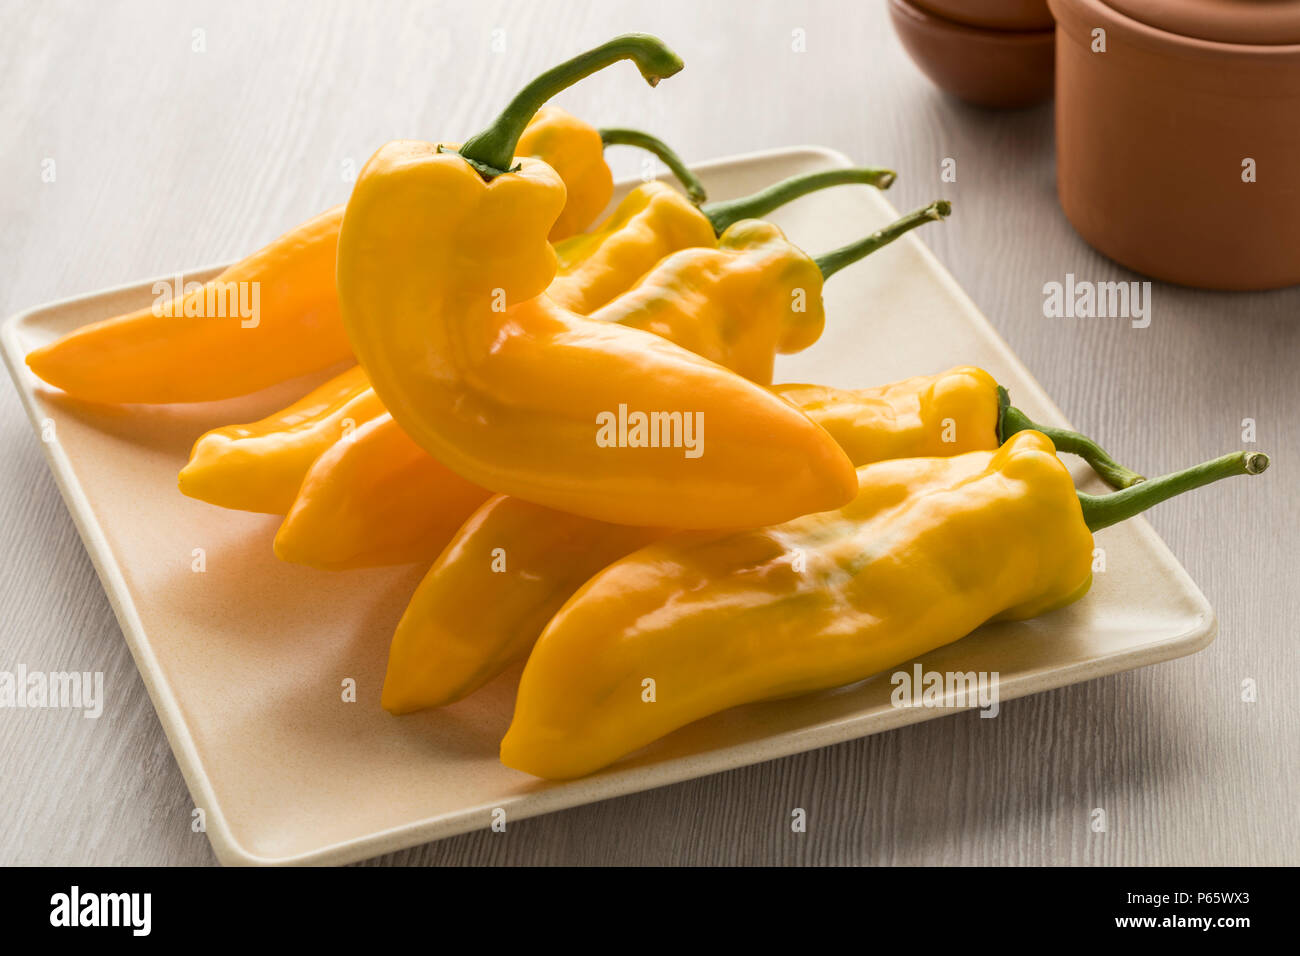 Fresh yellow pointed pepper on a plate Stock Photo